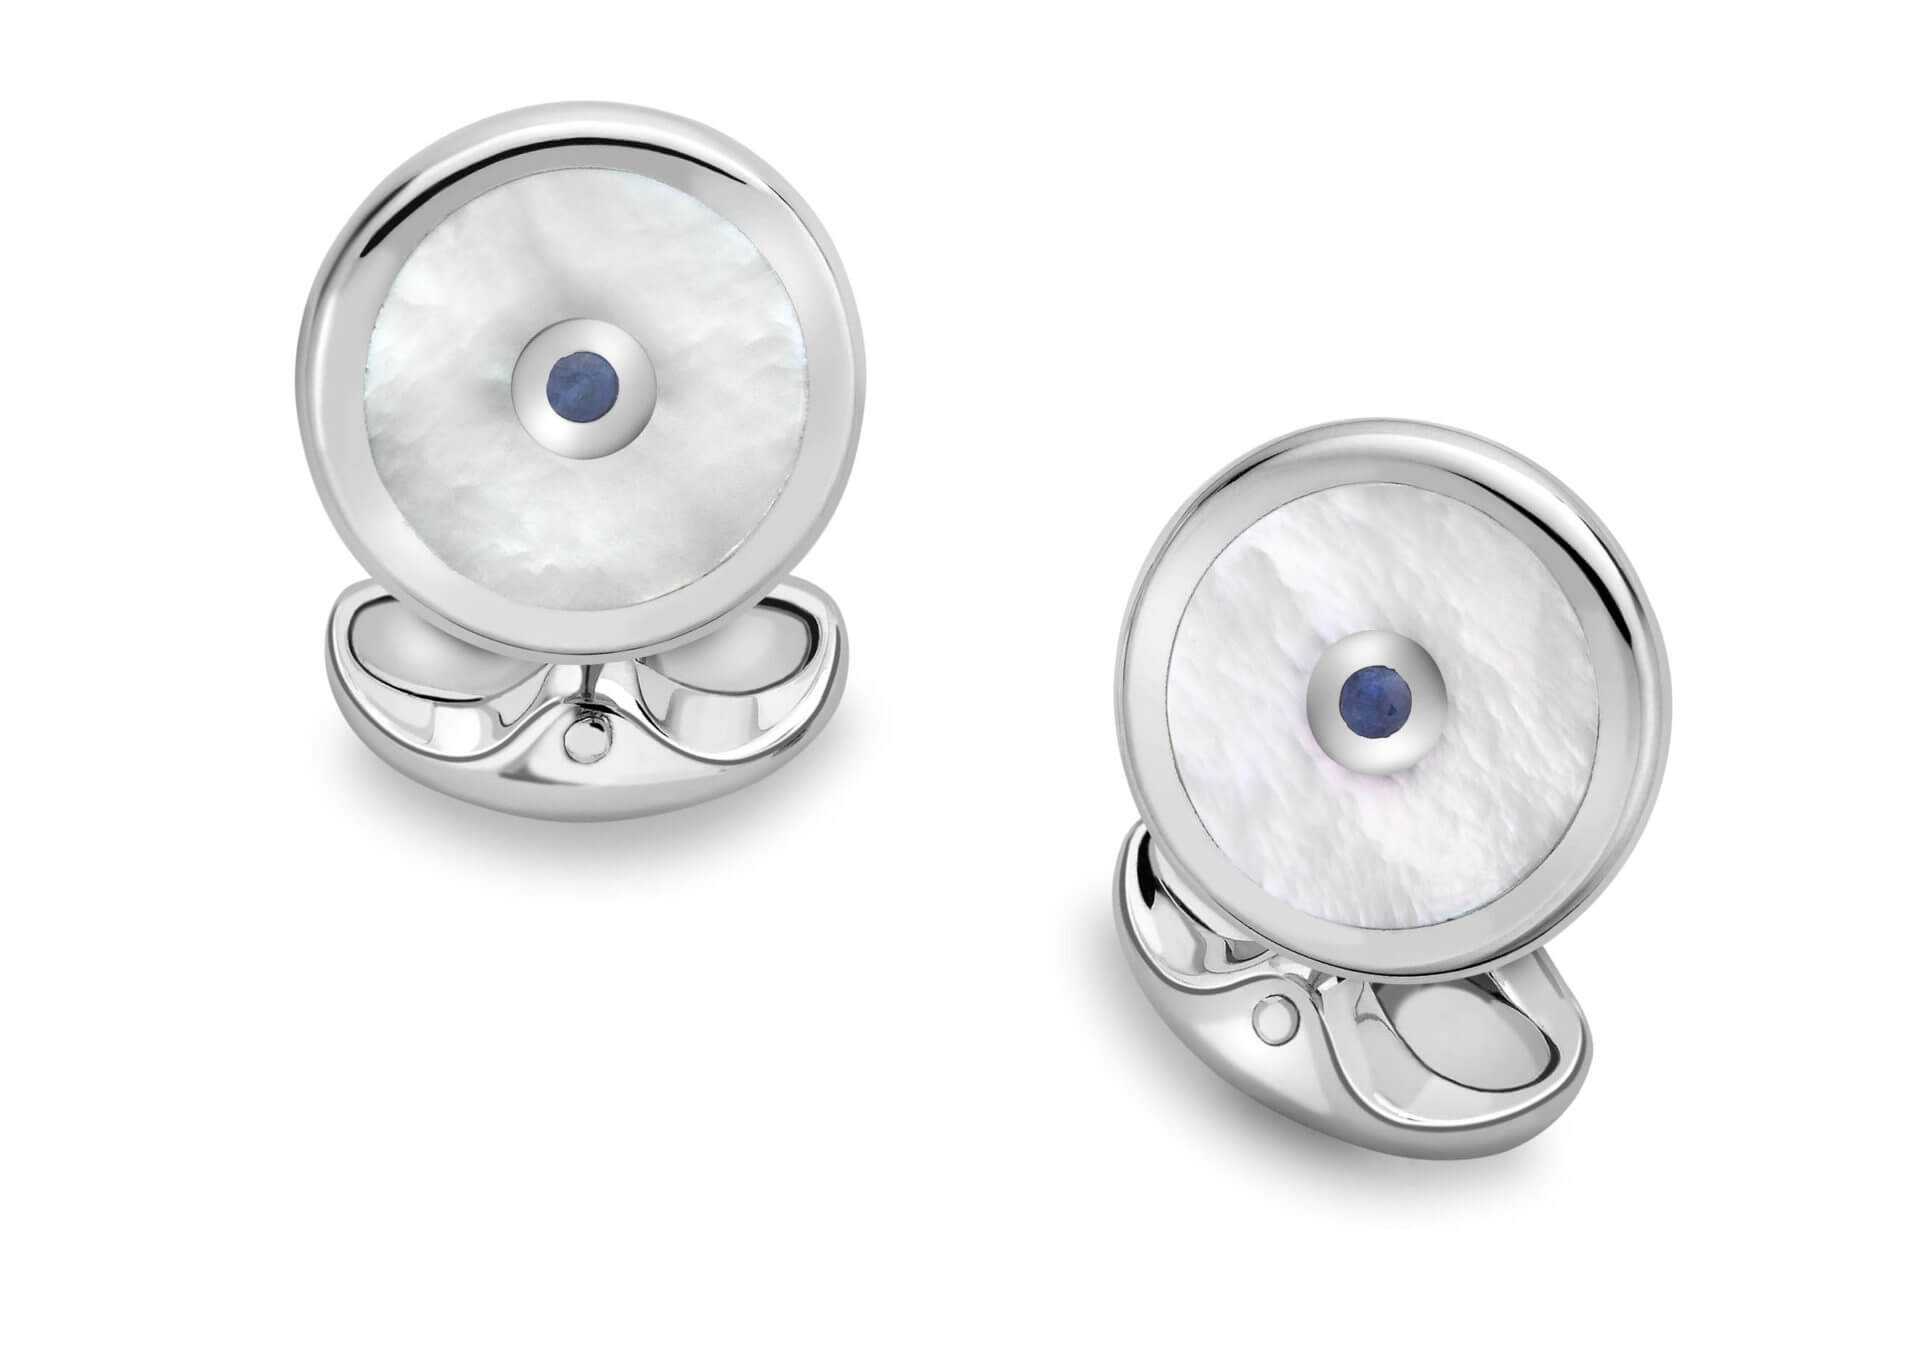 Sterling Silver Round Cufflinks with Mother of Pearl and Sapphire